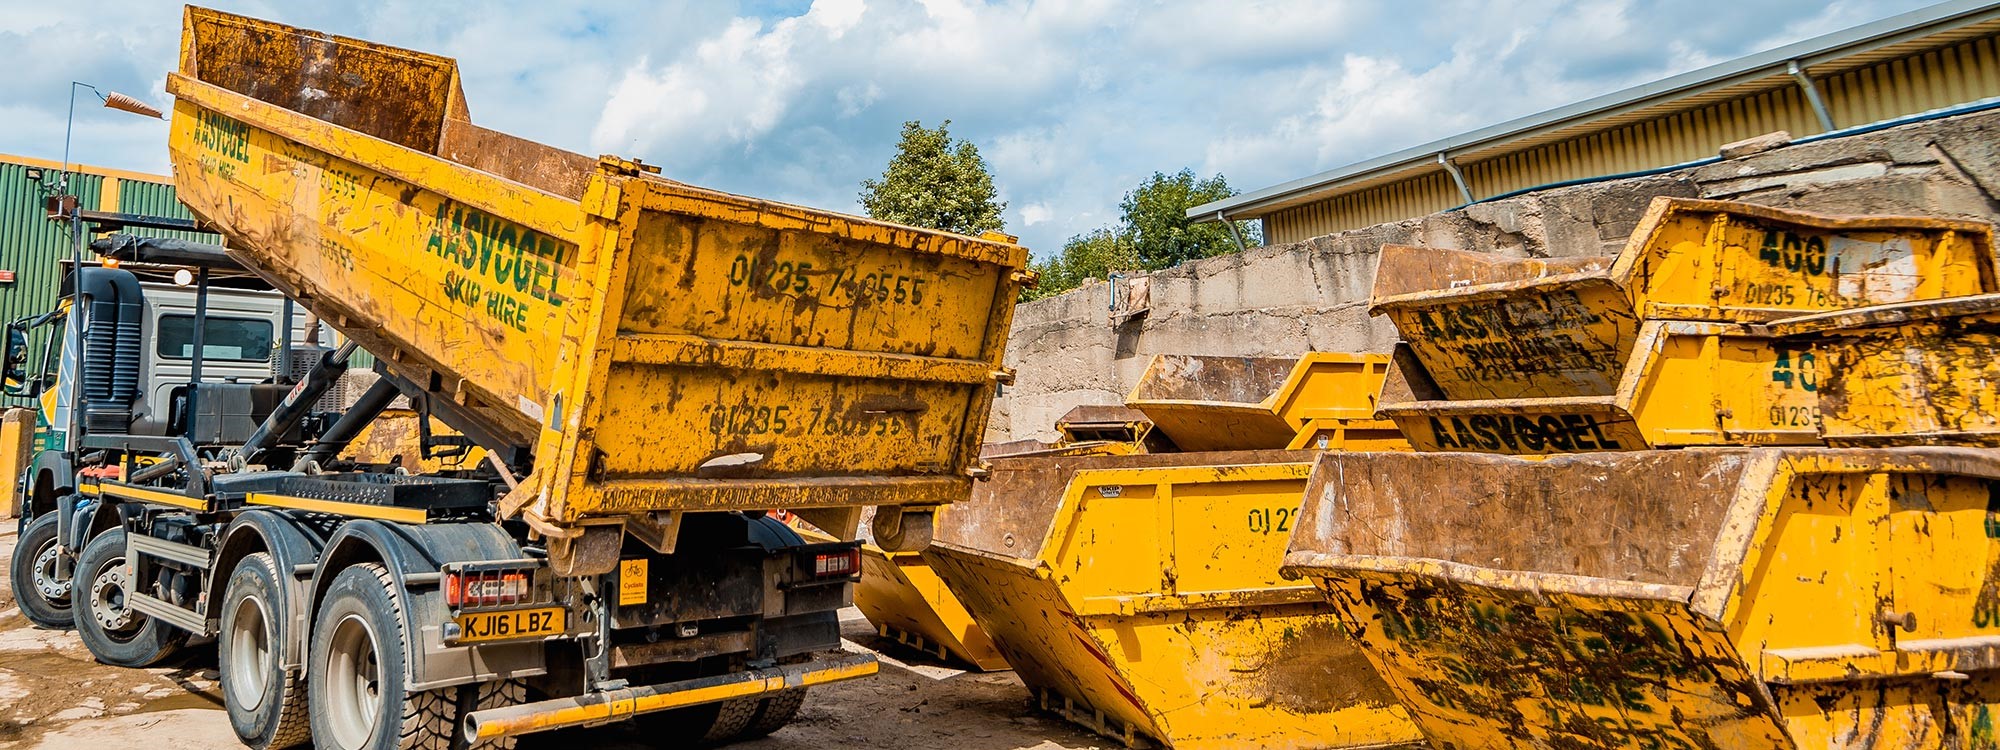 hire skip hire waste removal services